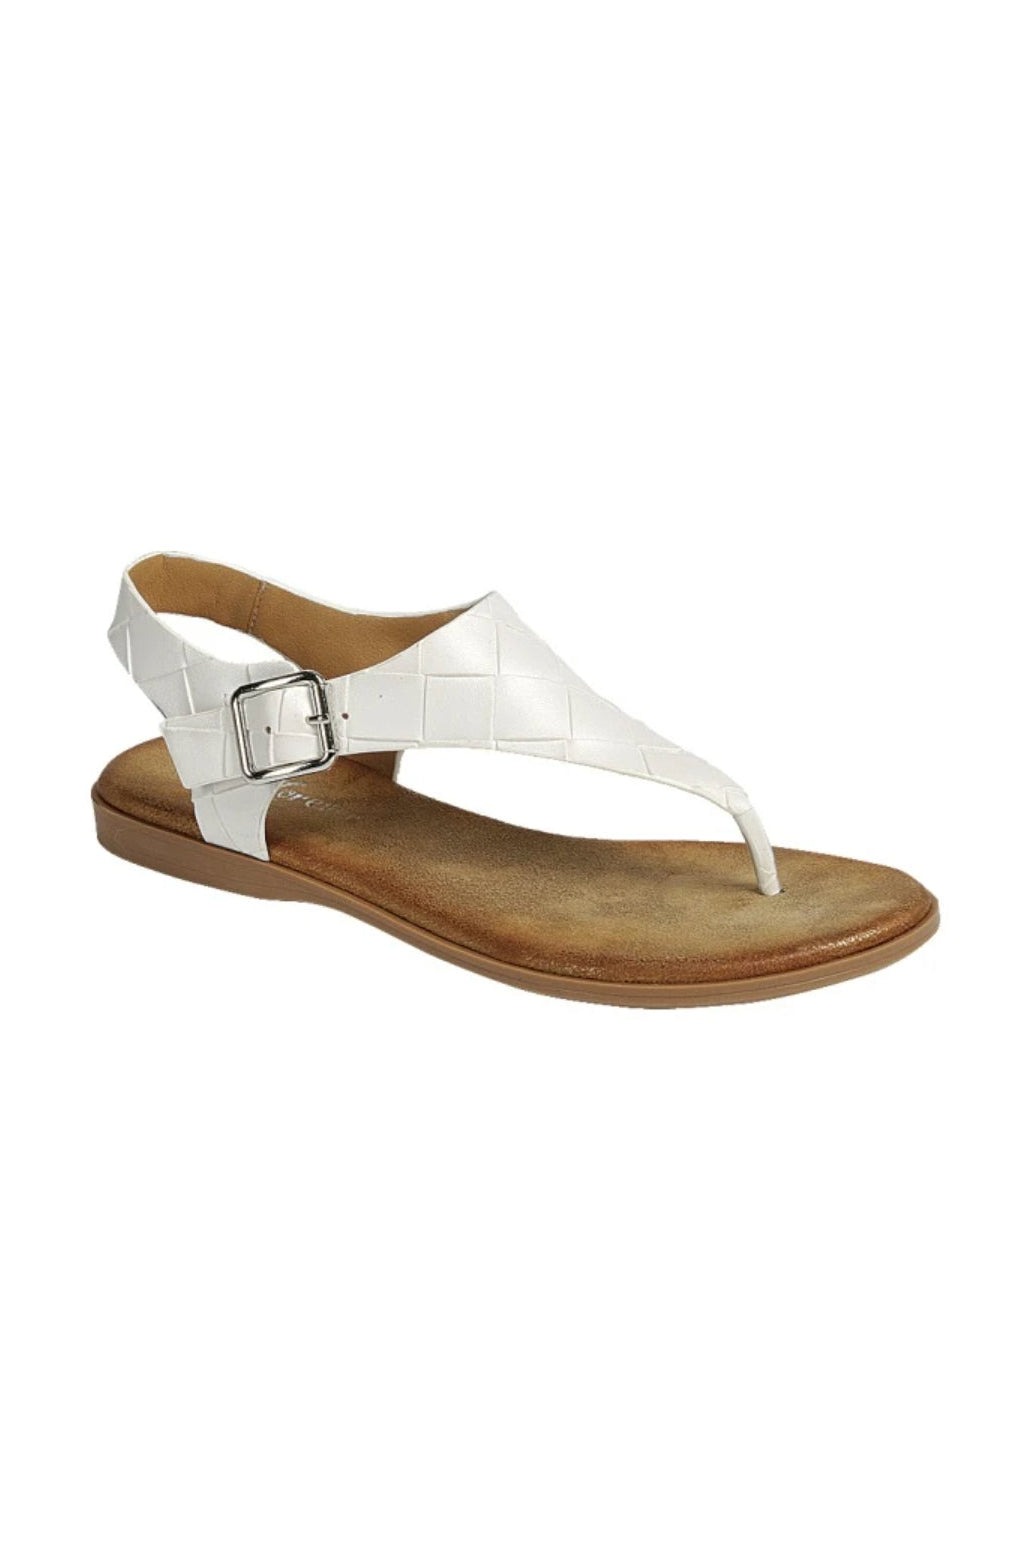 White Braided Slingback Sandal Accessories Boutique Simplified